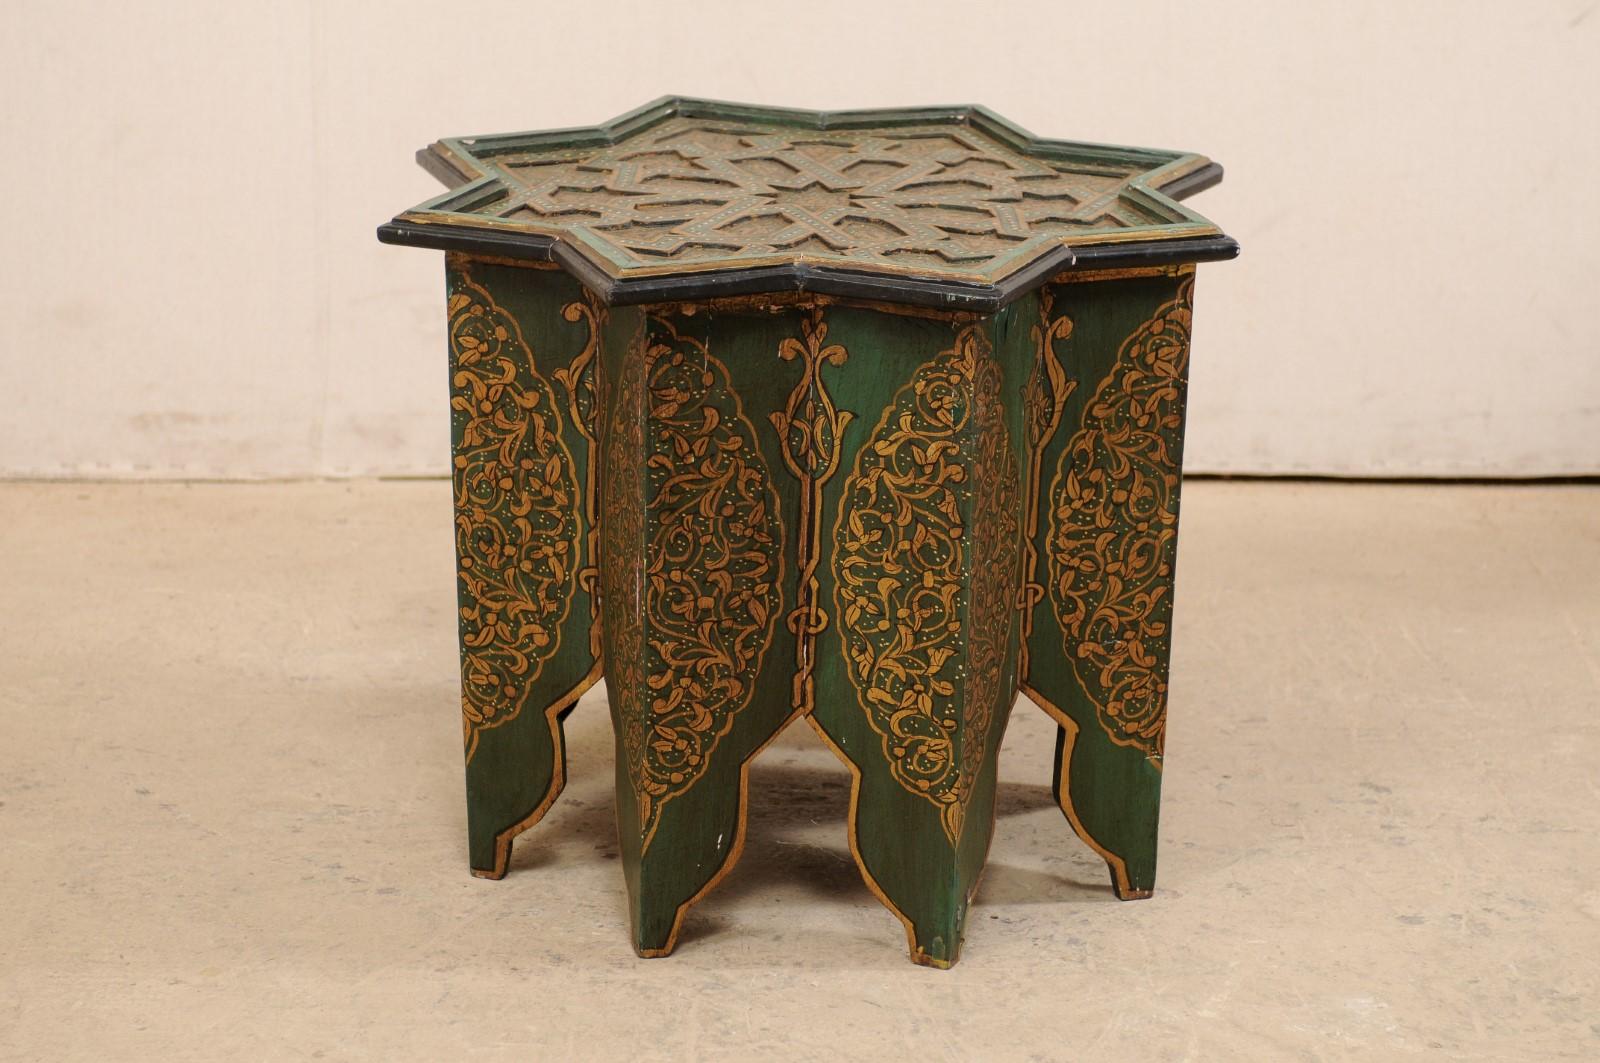 A vintage Moroccan small coffee or tea table delicately hand-painted with Morrish star-shaped top. This side table from Morocco features a Morrish star-shaped top, with recessed cut-outs in geometric and star shapes, set within raised lip about